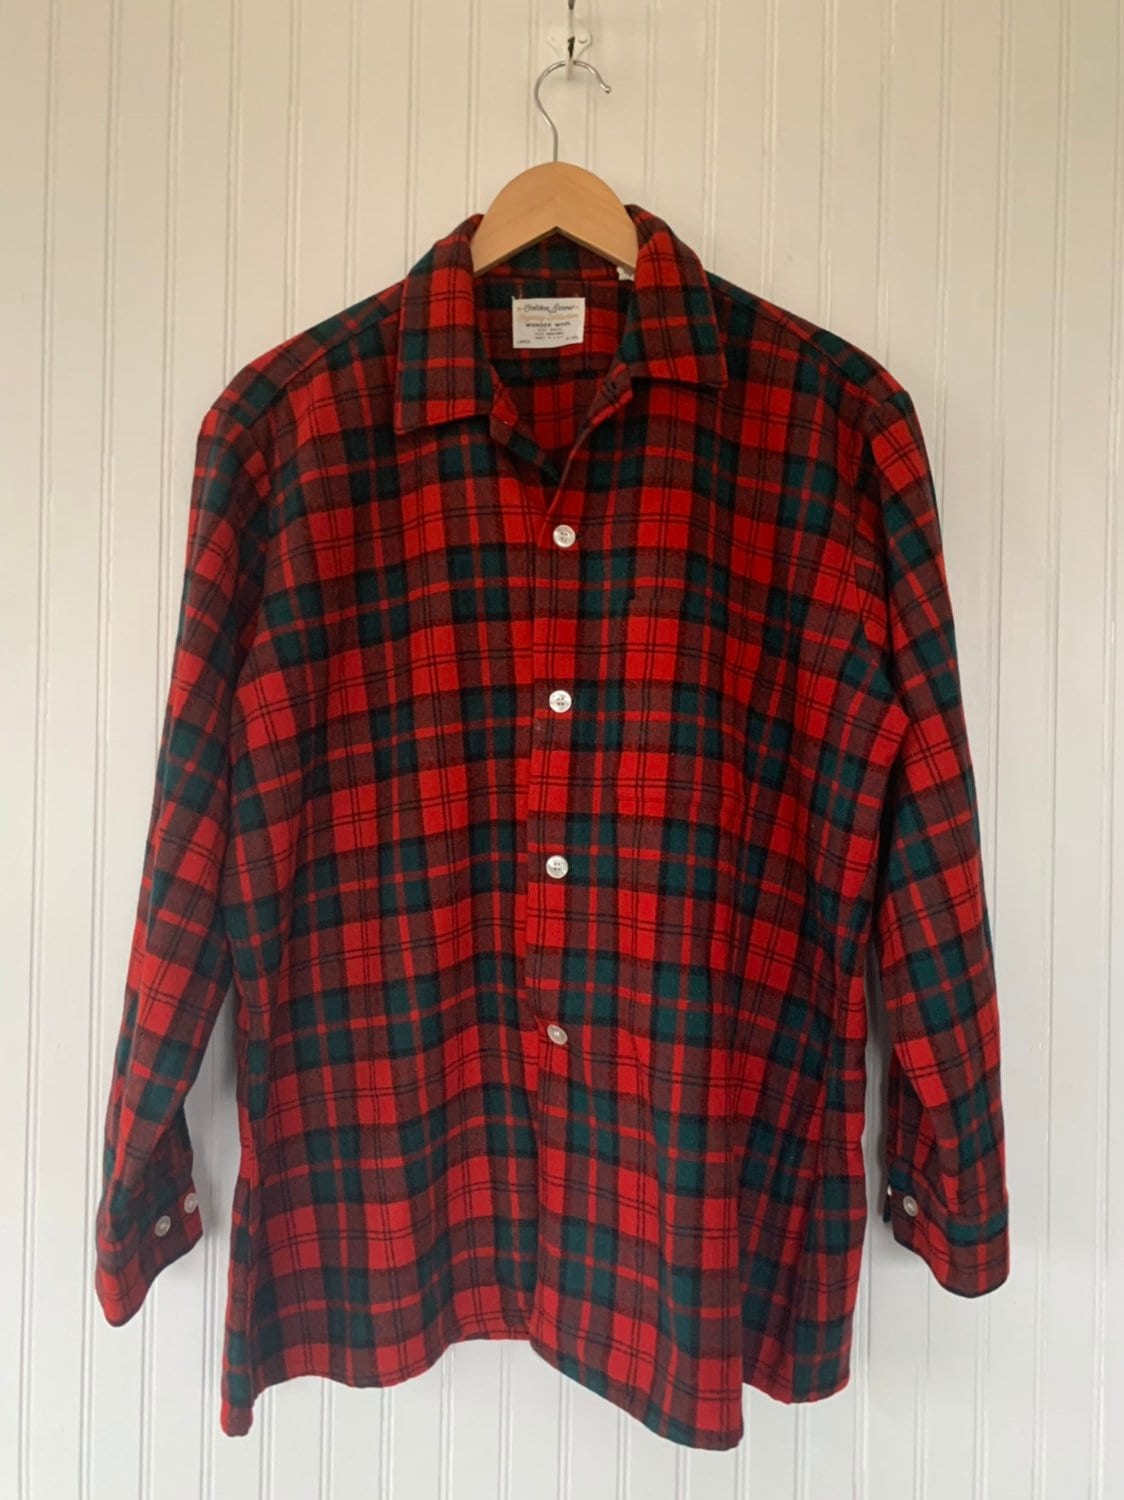 50s Vintage Holiday Wool Plaid Shirt Long Sleeve Top Red Green Black ...